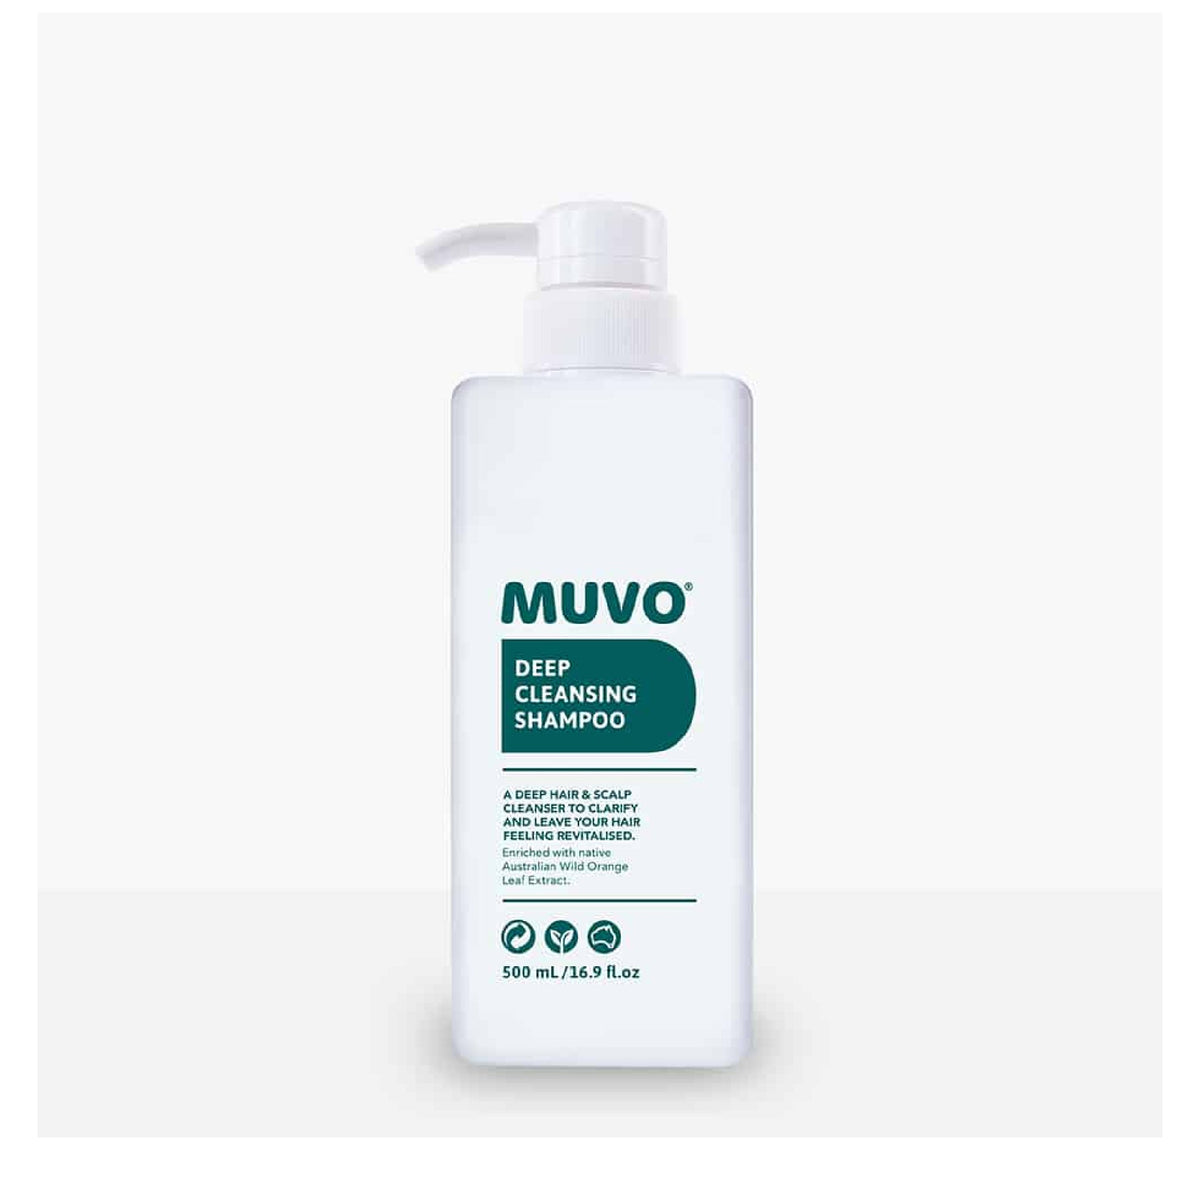 Muvo Deep Cleansing Shampoo - Haircare Superstore